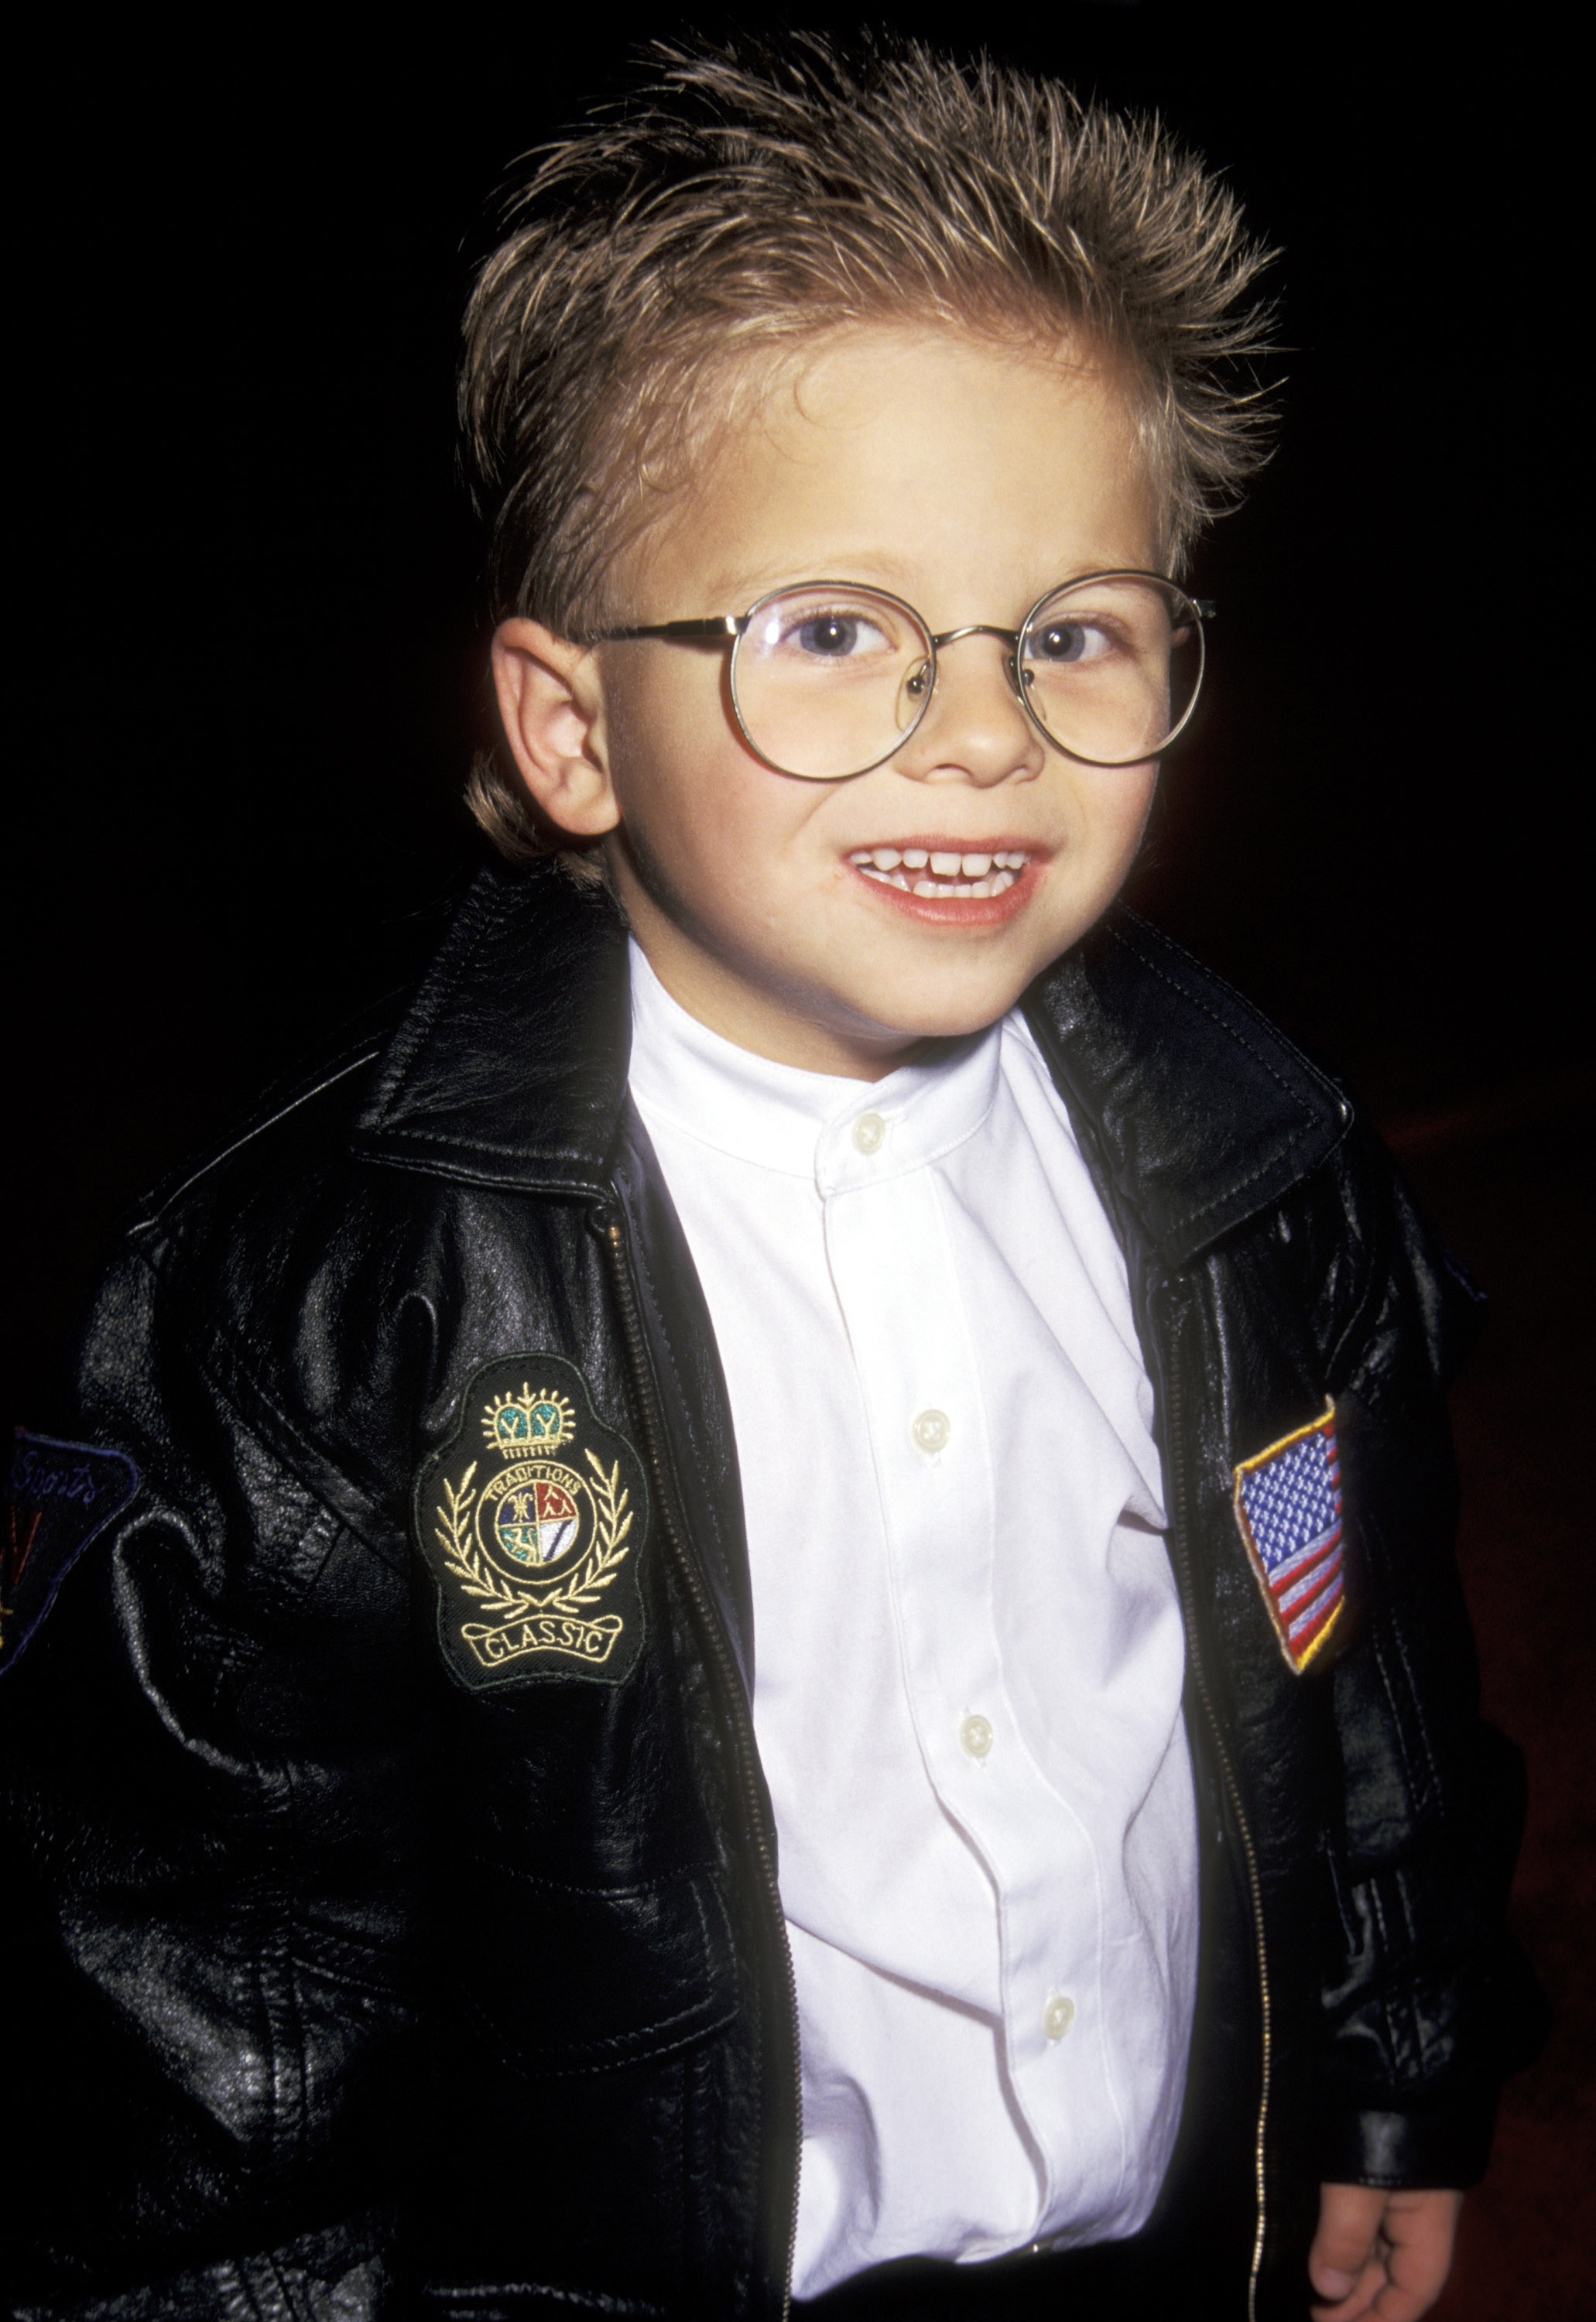 Jonathan Lipnicki at the premier of "Jerry Maguire" in New York City in 1996 | Source: Getty Images